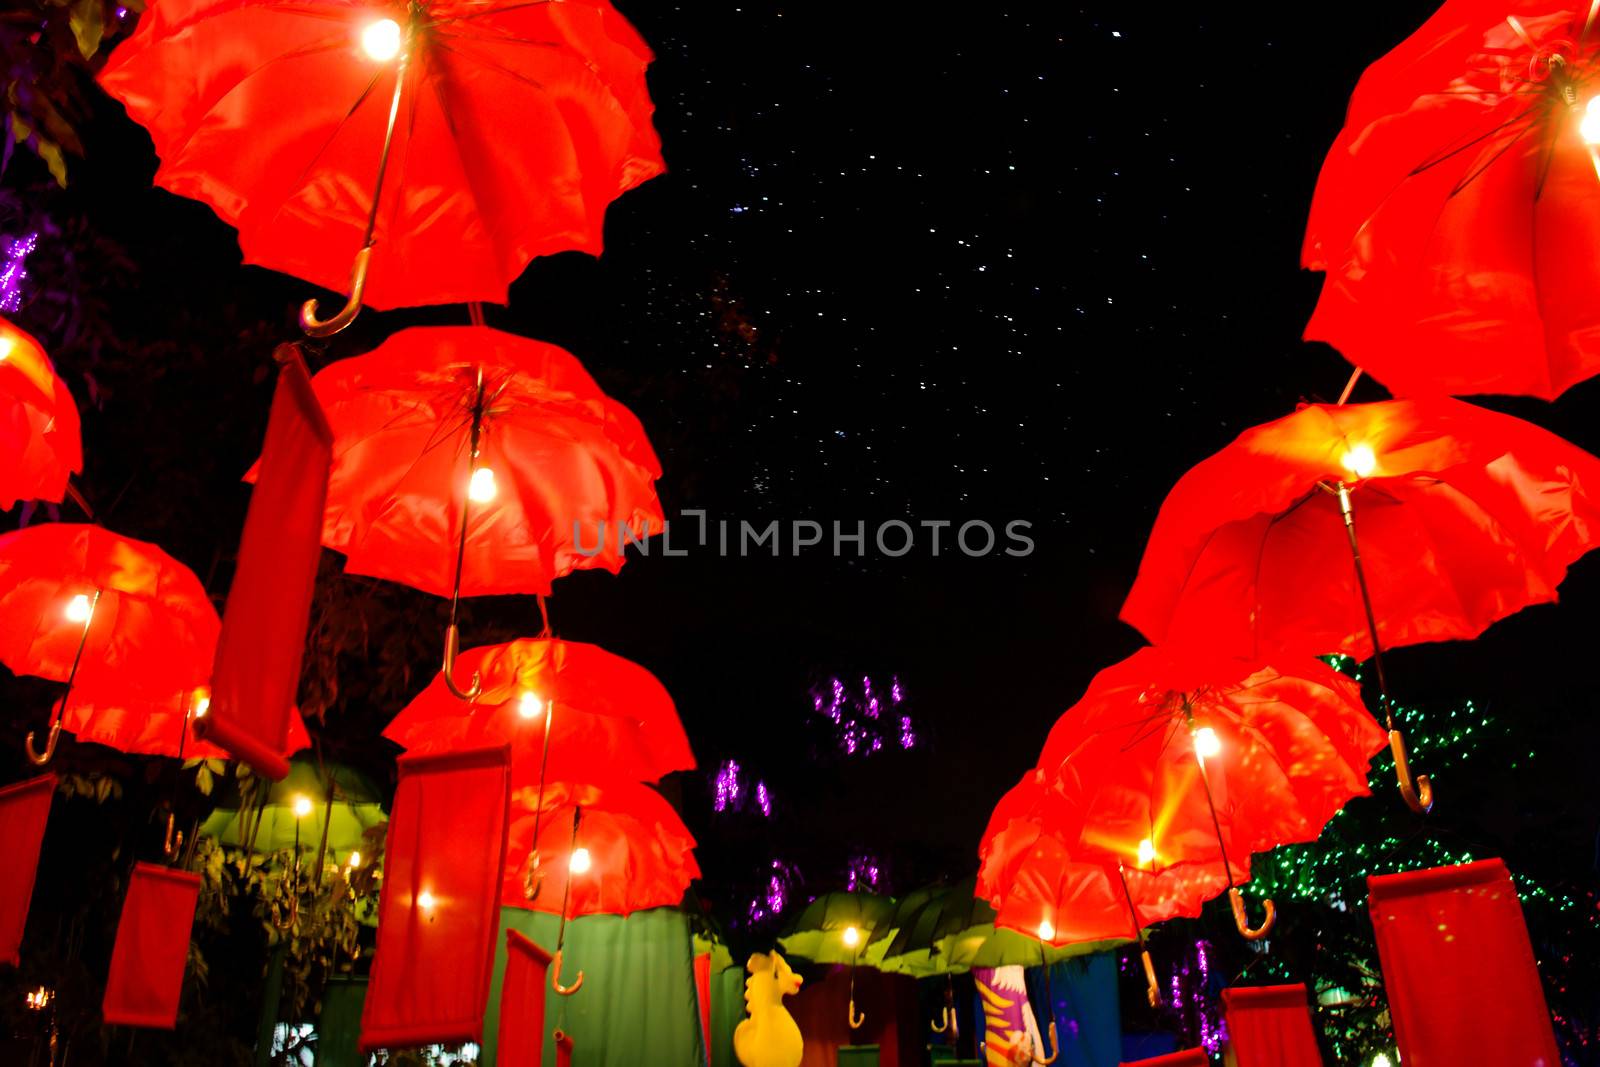 Red umbrella in the night sky by apichart